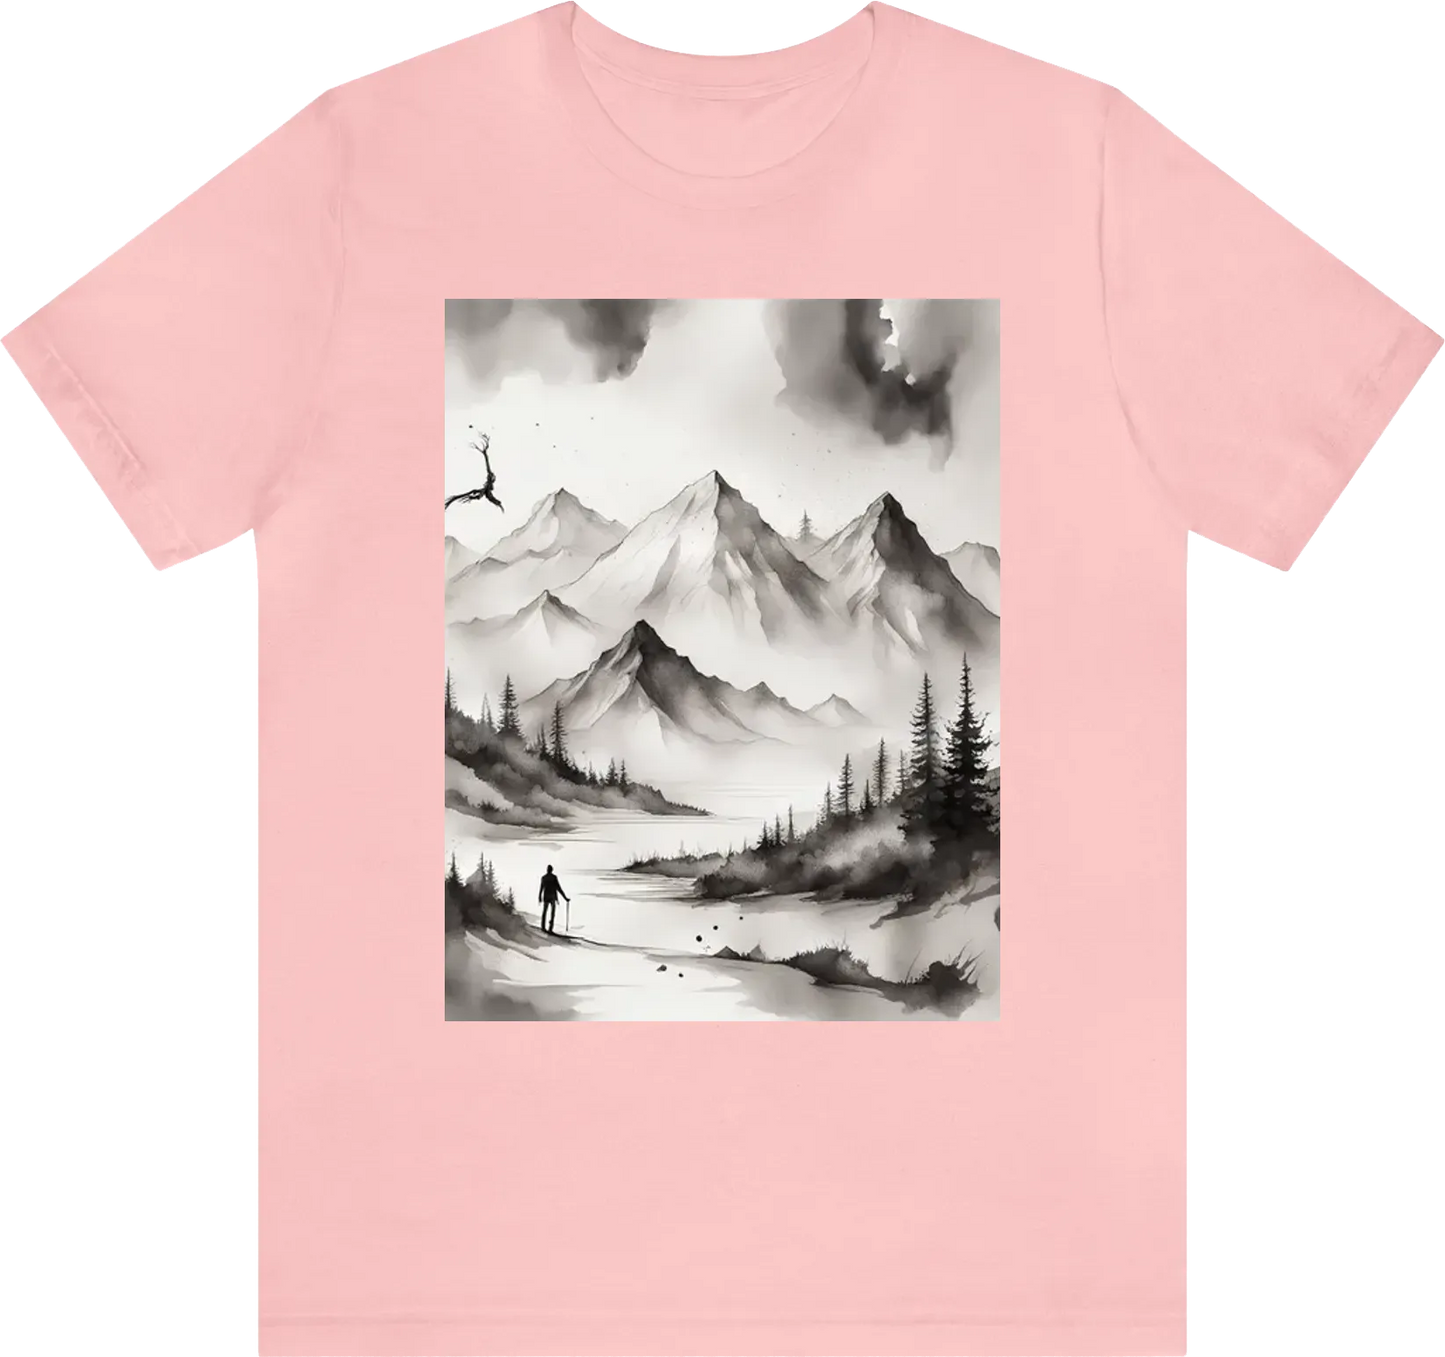 Ector t-shirt design, minimalistic ink drawing style, vanishing point on white paper, mountains and skeletons Double exposure watercolor splash, in black and white, but with only a few autumn color accent, art incorporated as complimentary elements, fashi